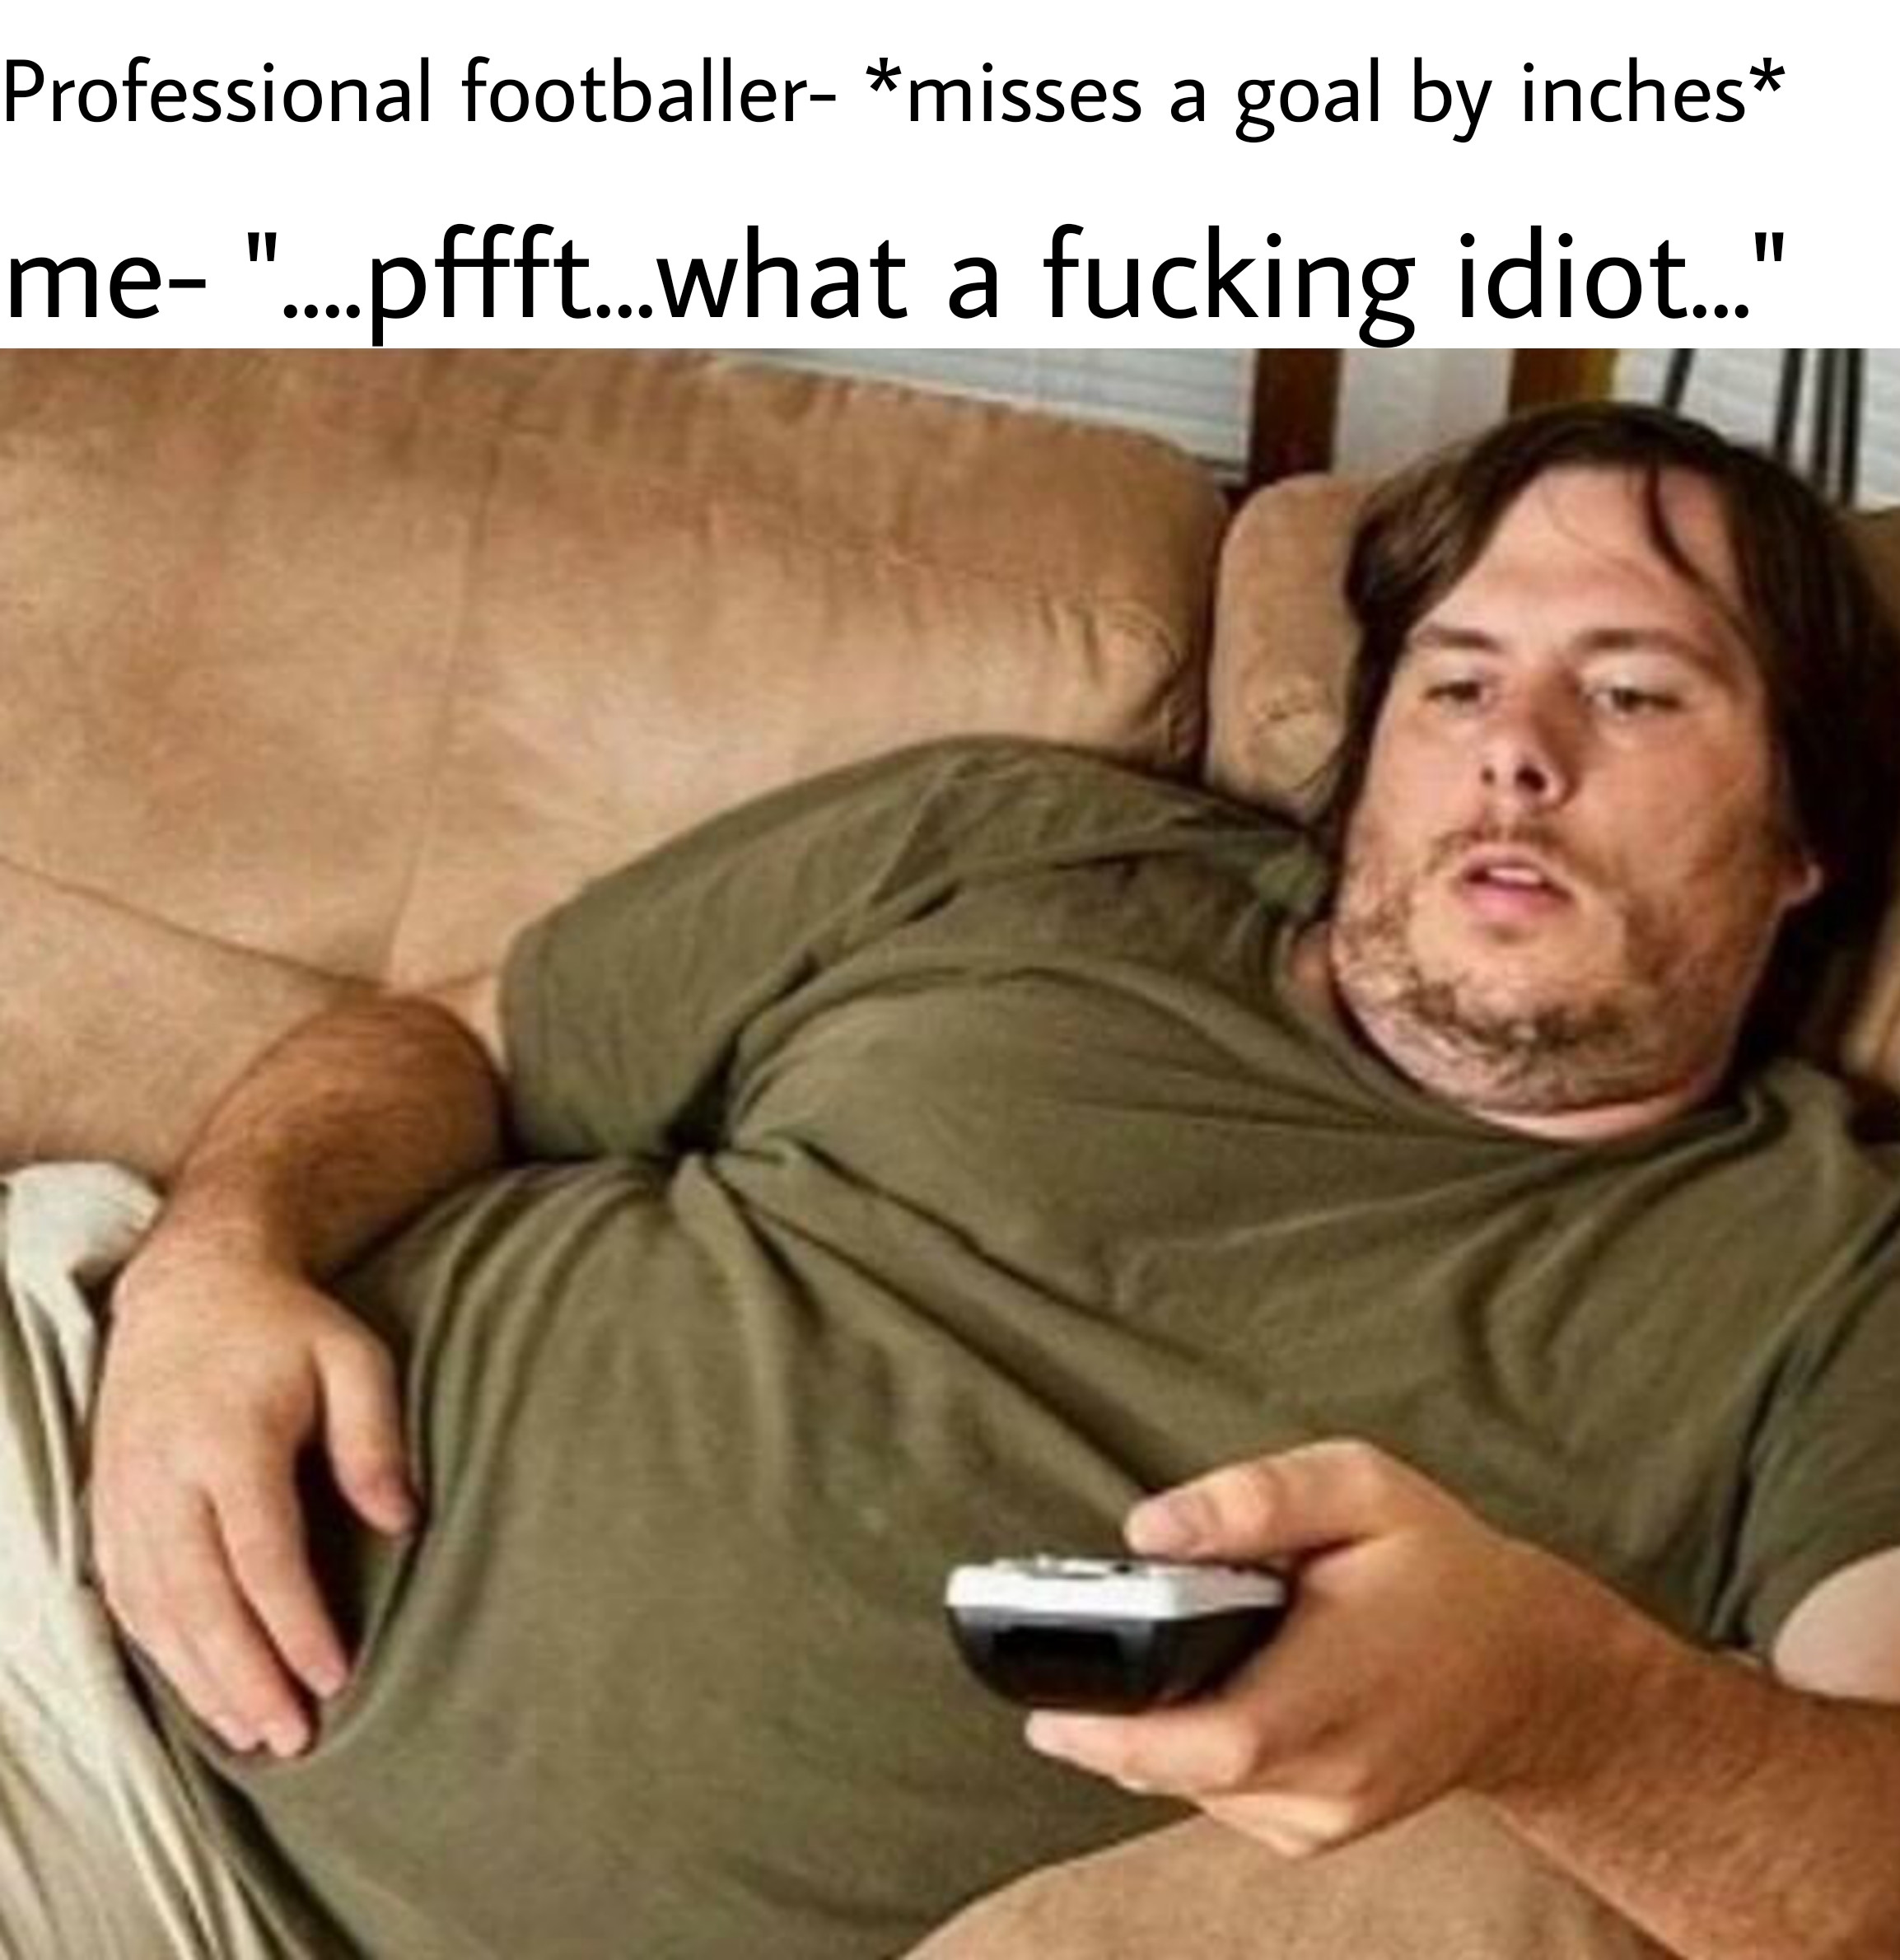 idiot watching tv - Professional footballer misses a goal by inches me "....pffft...what a fucking idiot..."